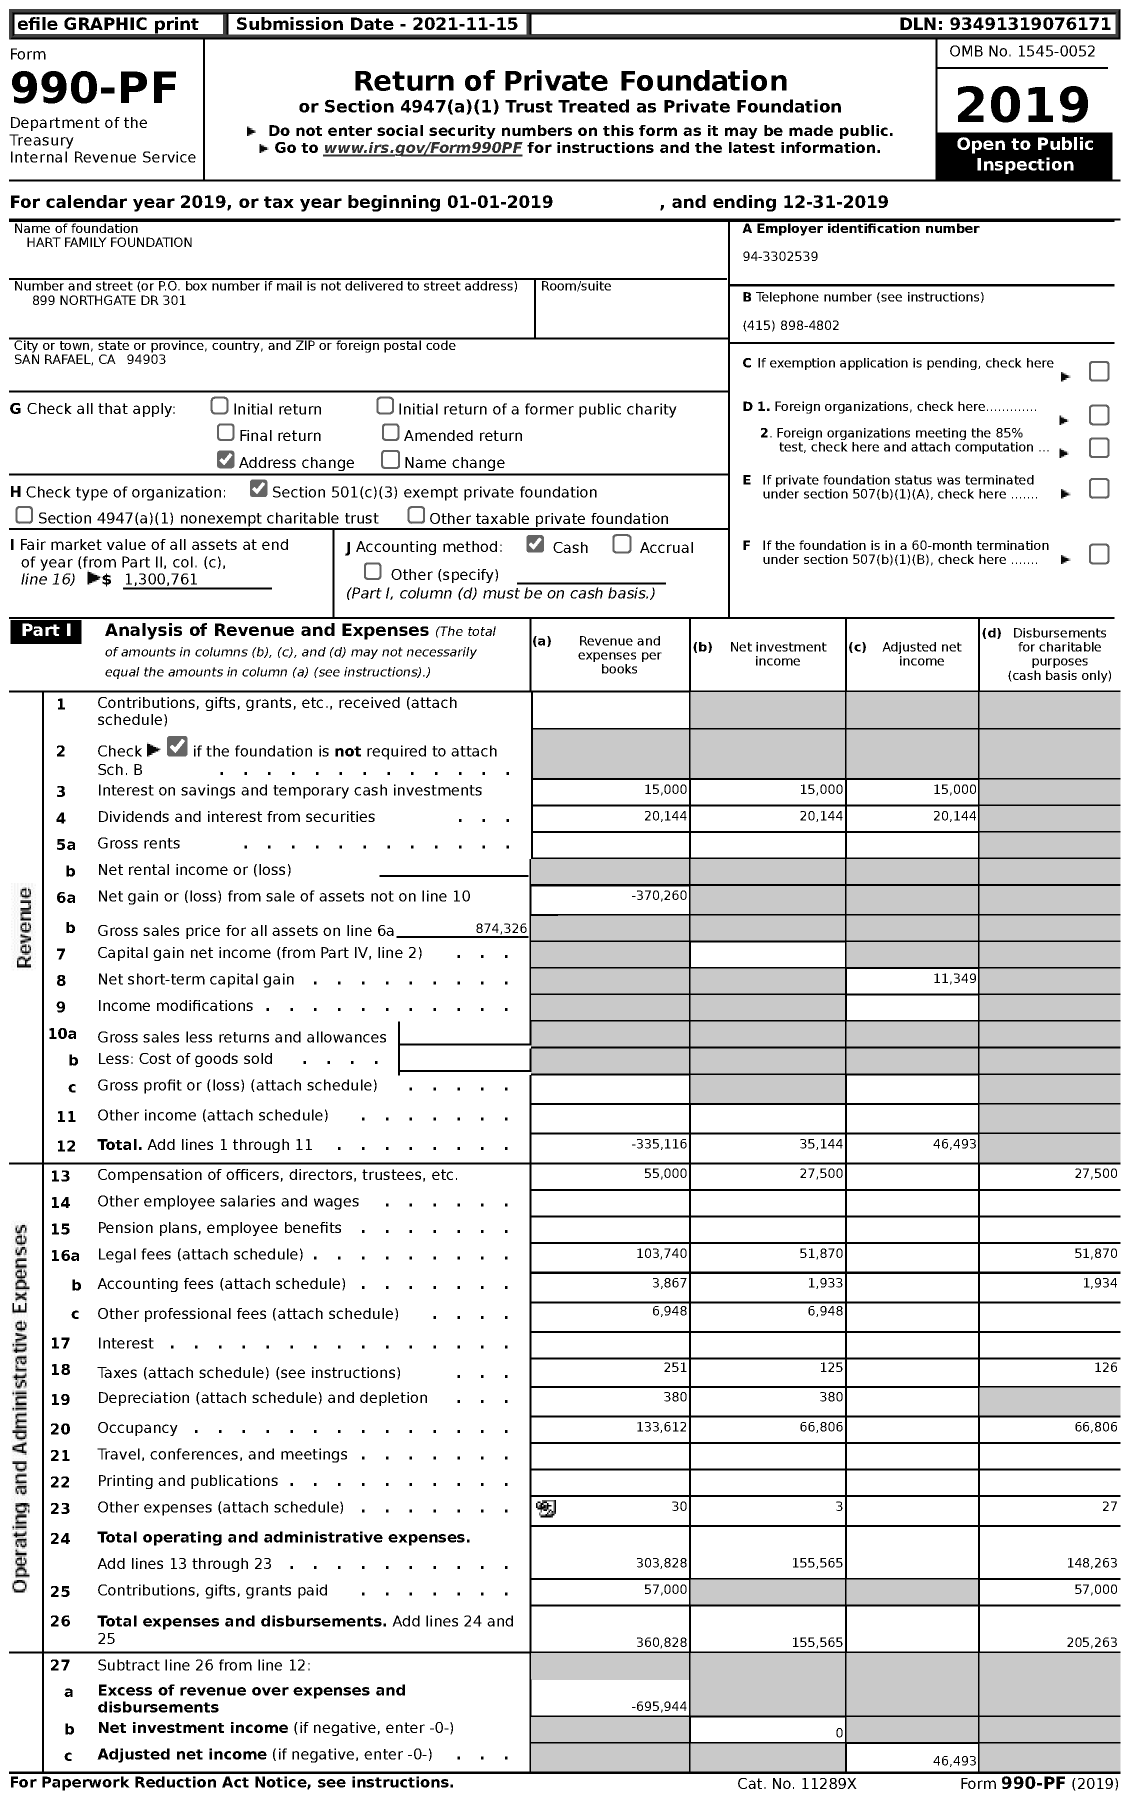 Image of first page of 2019 Form 990PF for Hart Family Foundation